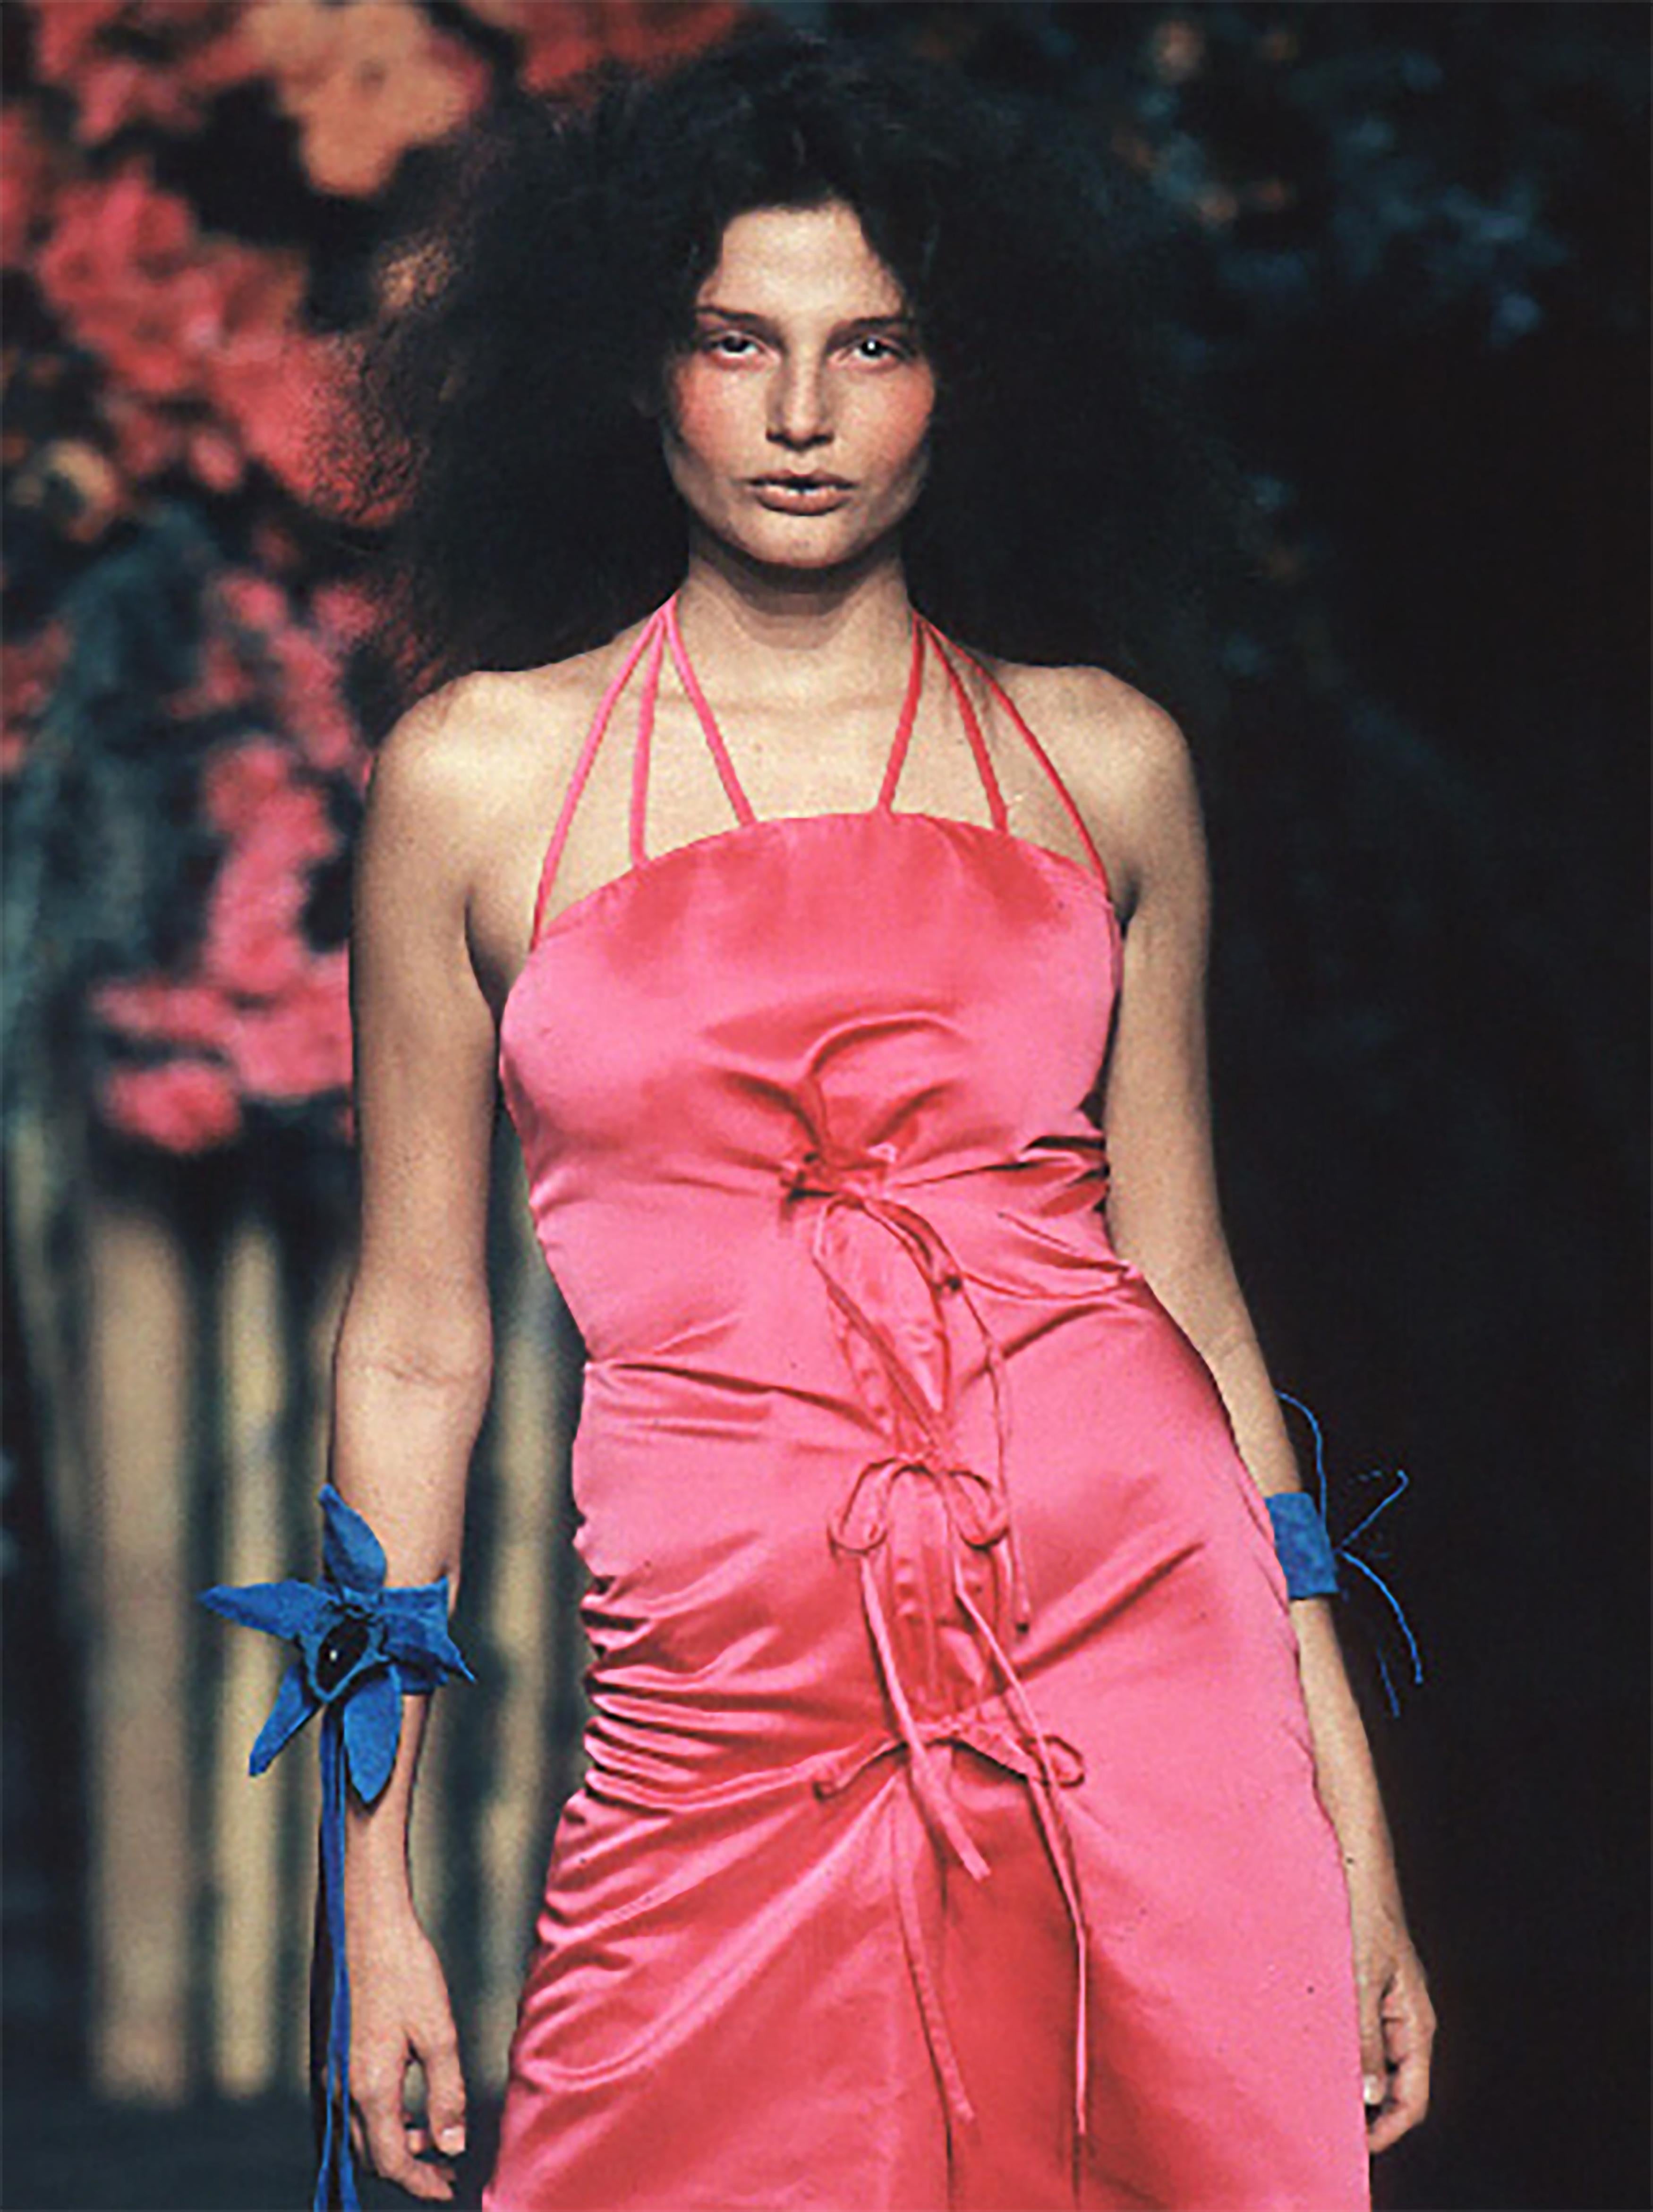 S/S 1999 Vivienne Westwood 'Red Label' hot pink silk gown with adjustable front ribbon ties. Halter neck gown with double straps that snap at front. Hidden side zip closure. As seen on the runway in mini version and in black colorway. 'Red Label'